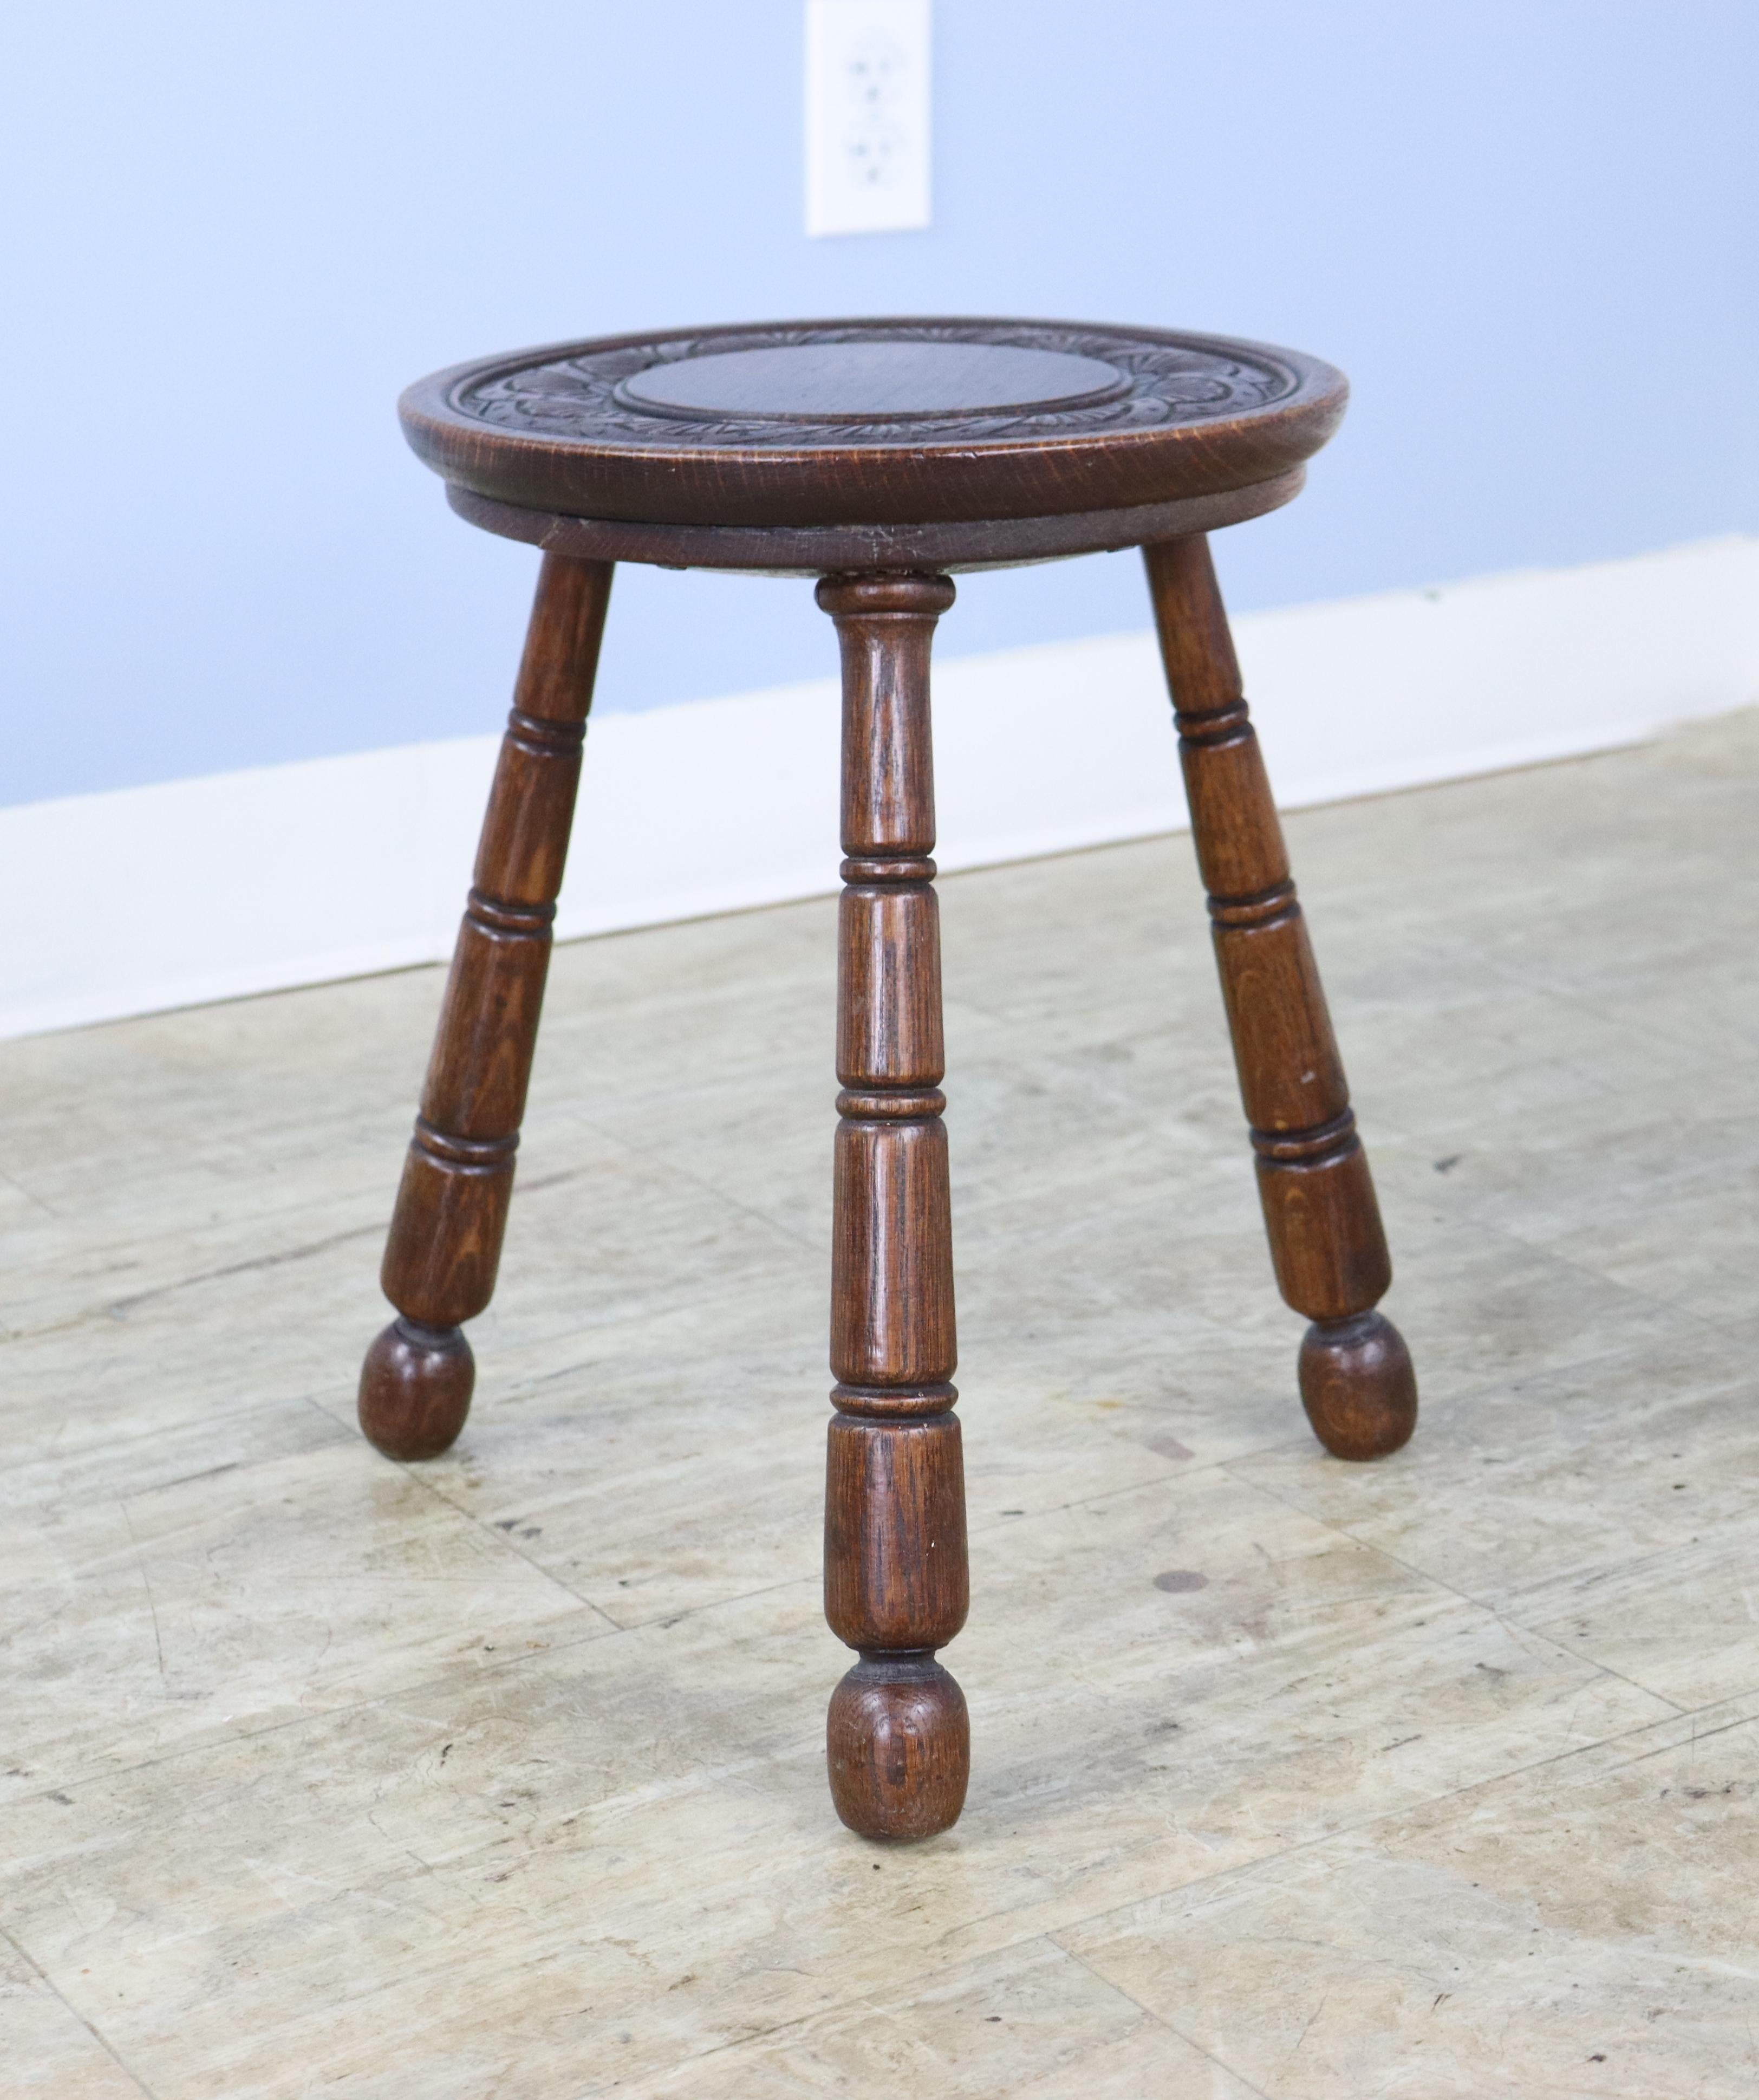 A sweet foot stool with a attractively carved seat. Tripod base in the style of a milking stool, and perfect as a comfortable seat by the fire, a perch for one's drink, or as a seat for a child.   The diameter measurement is for the entire stool. 